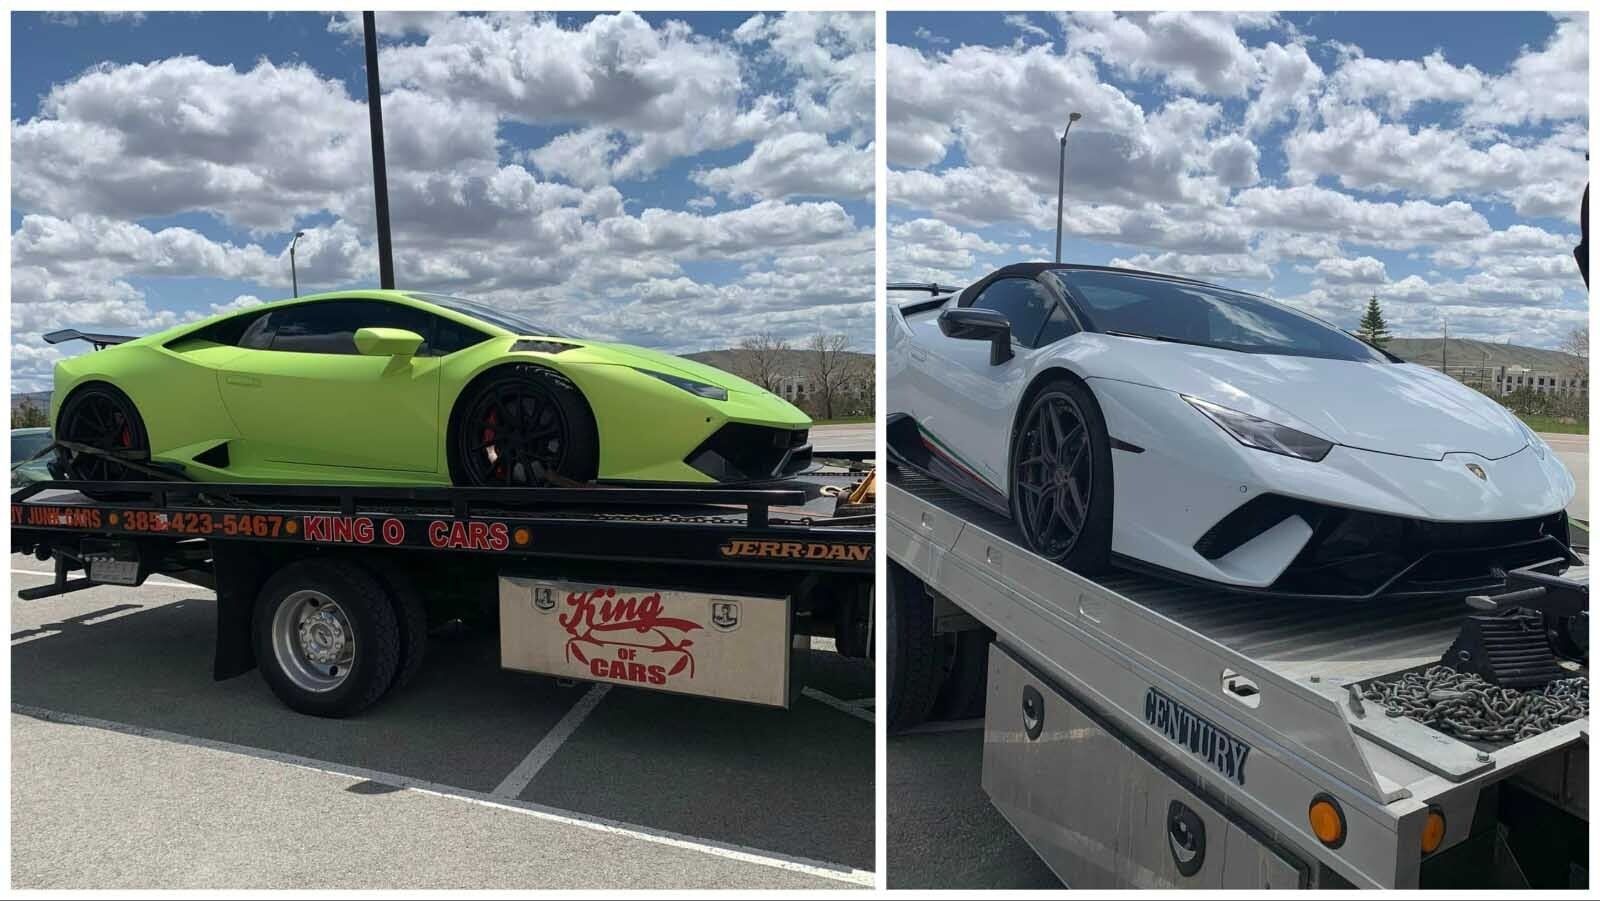 The Wyoming Highway Patrol says two Colorado men tried to smuggle two stolen Lamborghinis through Interstate 80 in Wyoming last month.